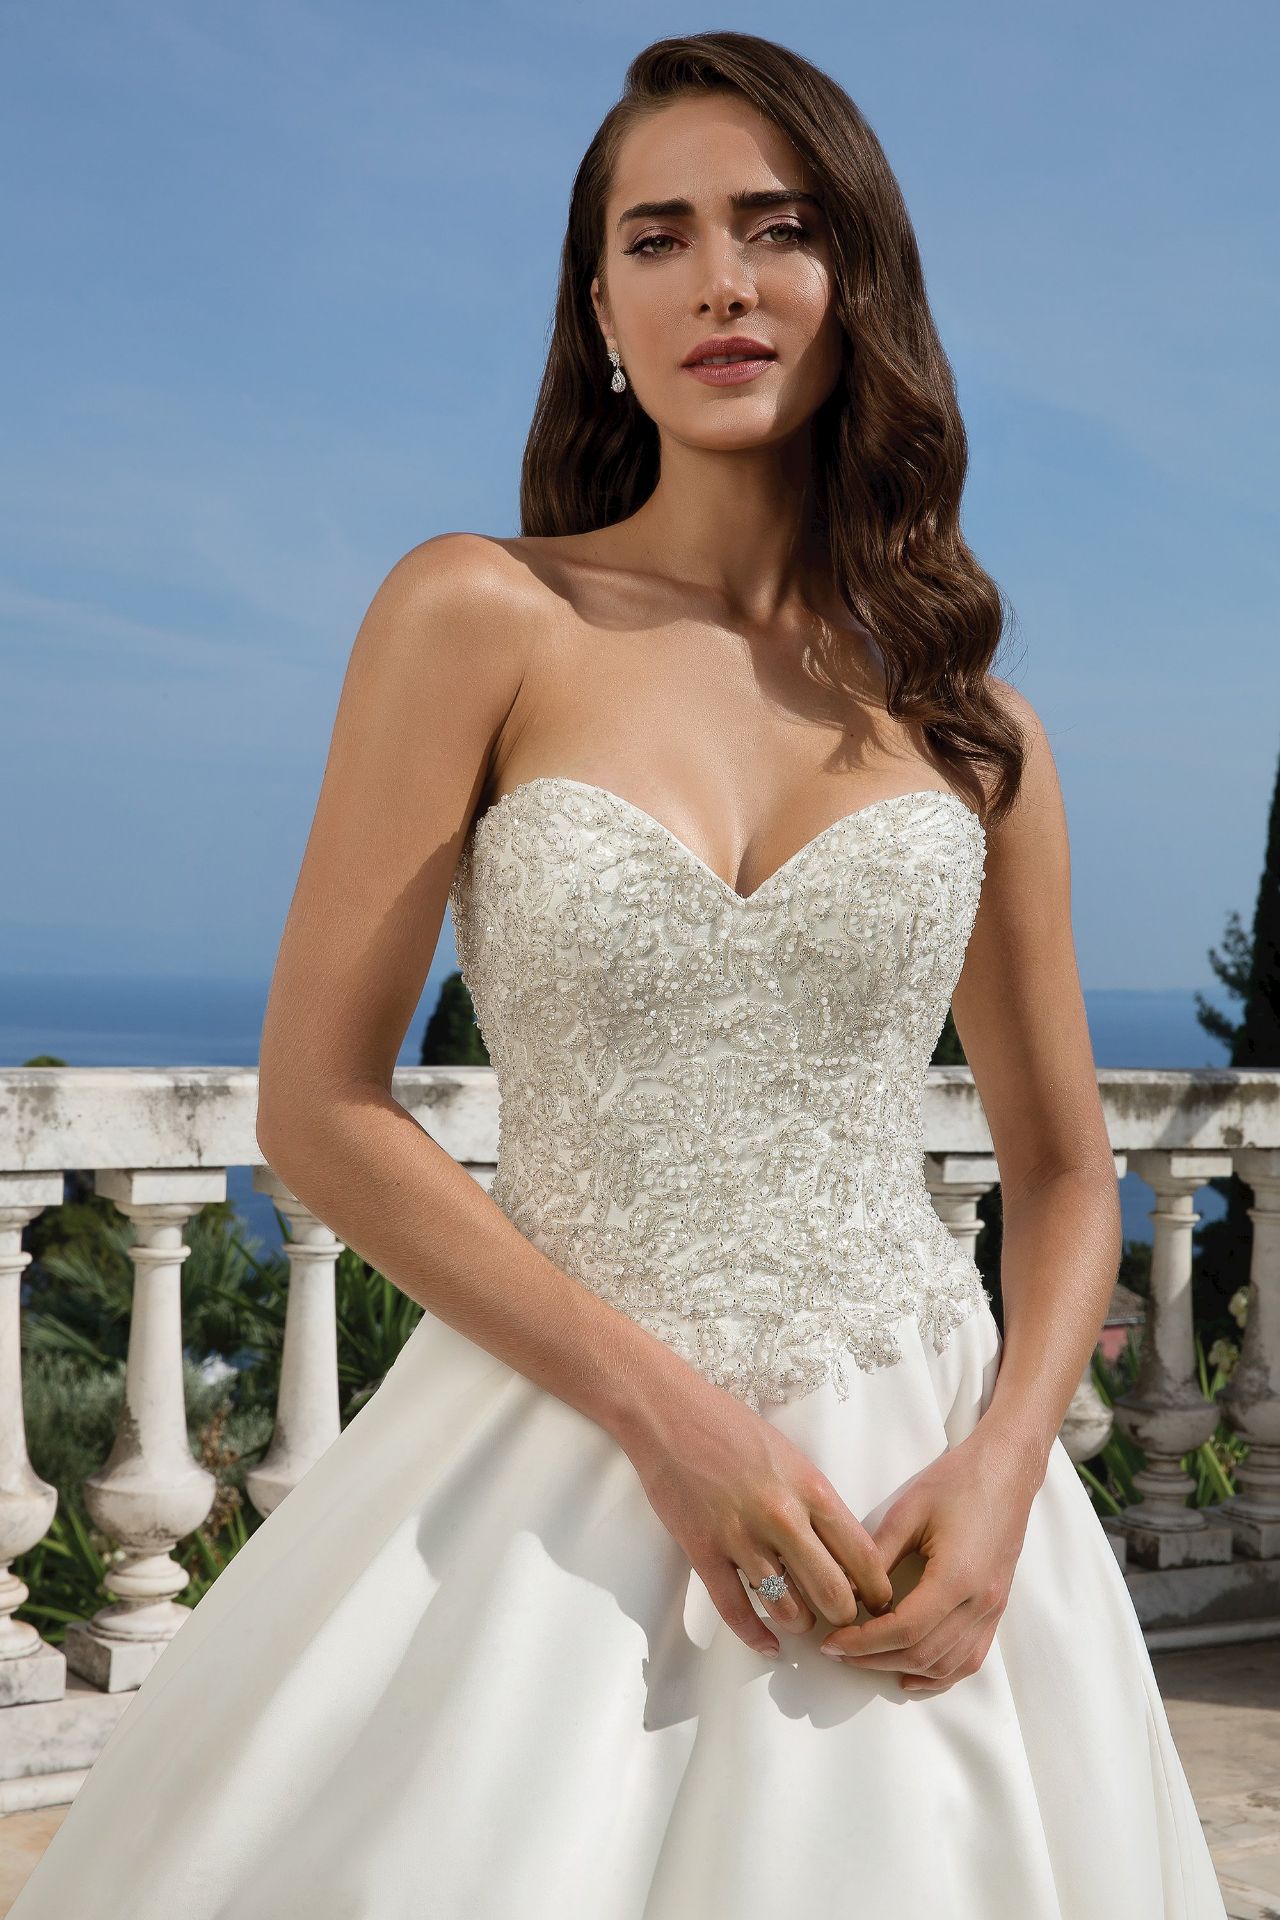 1 x Justin Alexander Strapless Wedding Dress With Allover Beaded Bodice - UK Size 14 - RRP £1,854 - Image 4 of 4